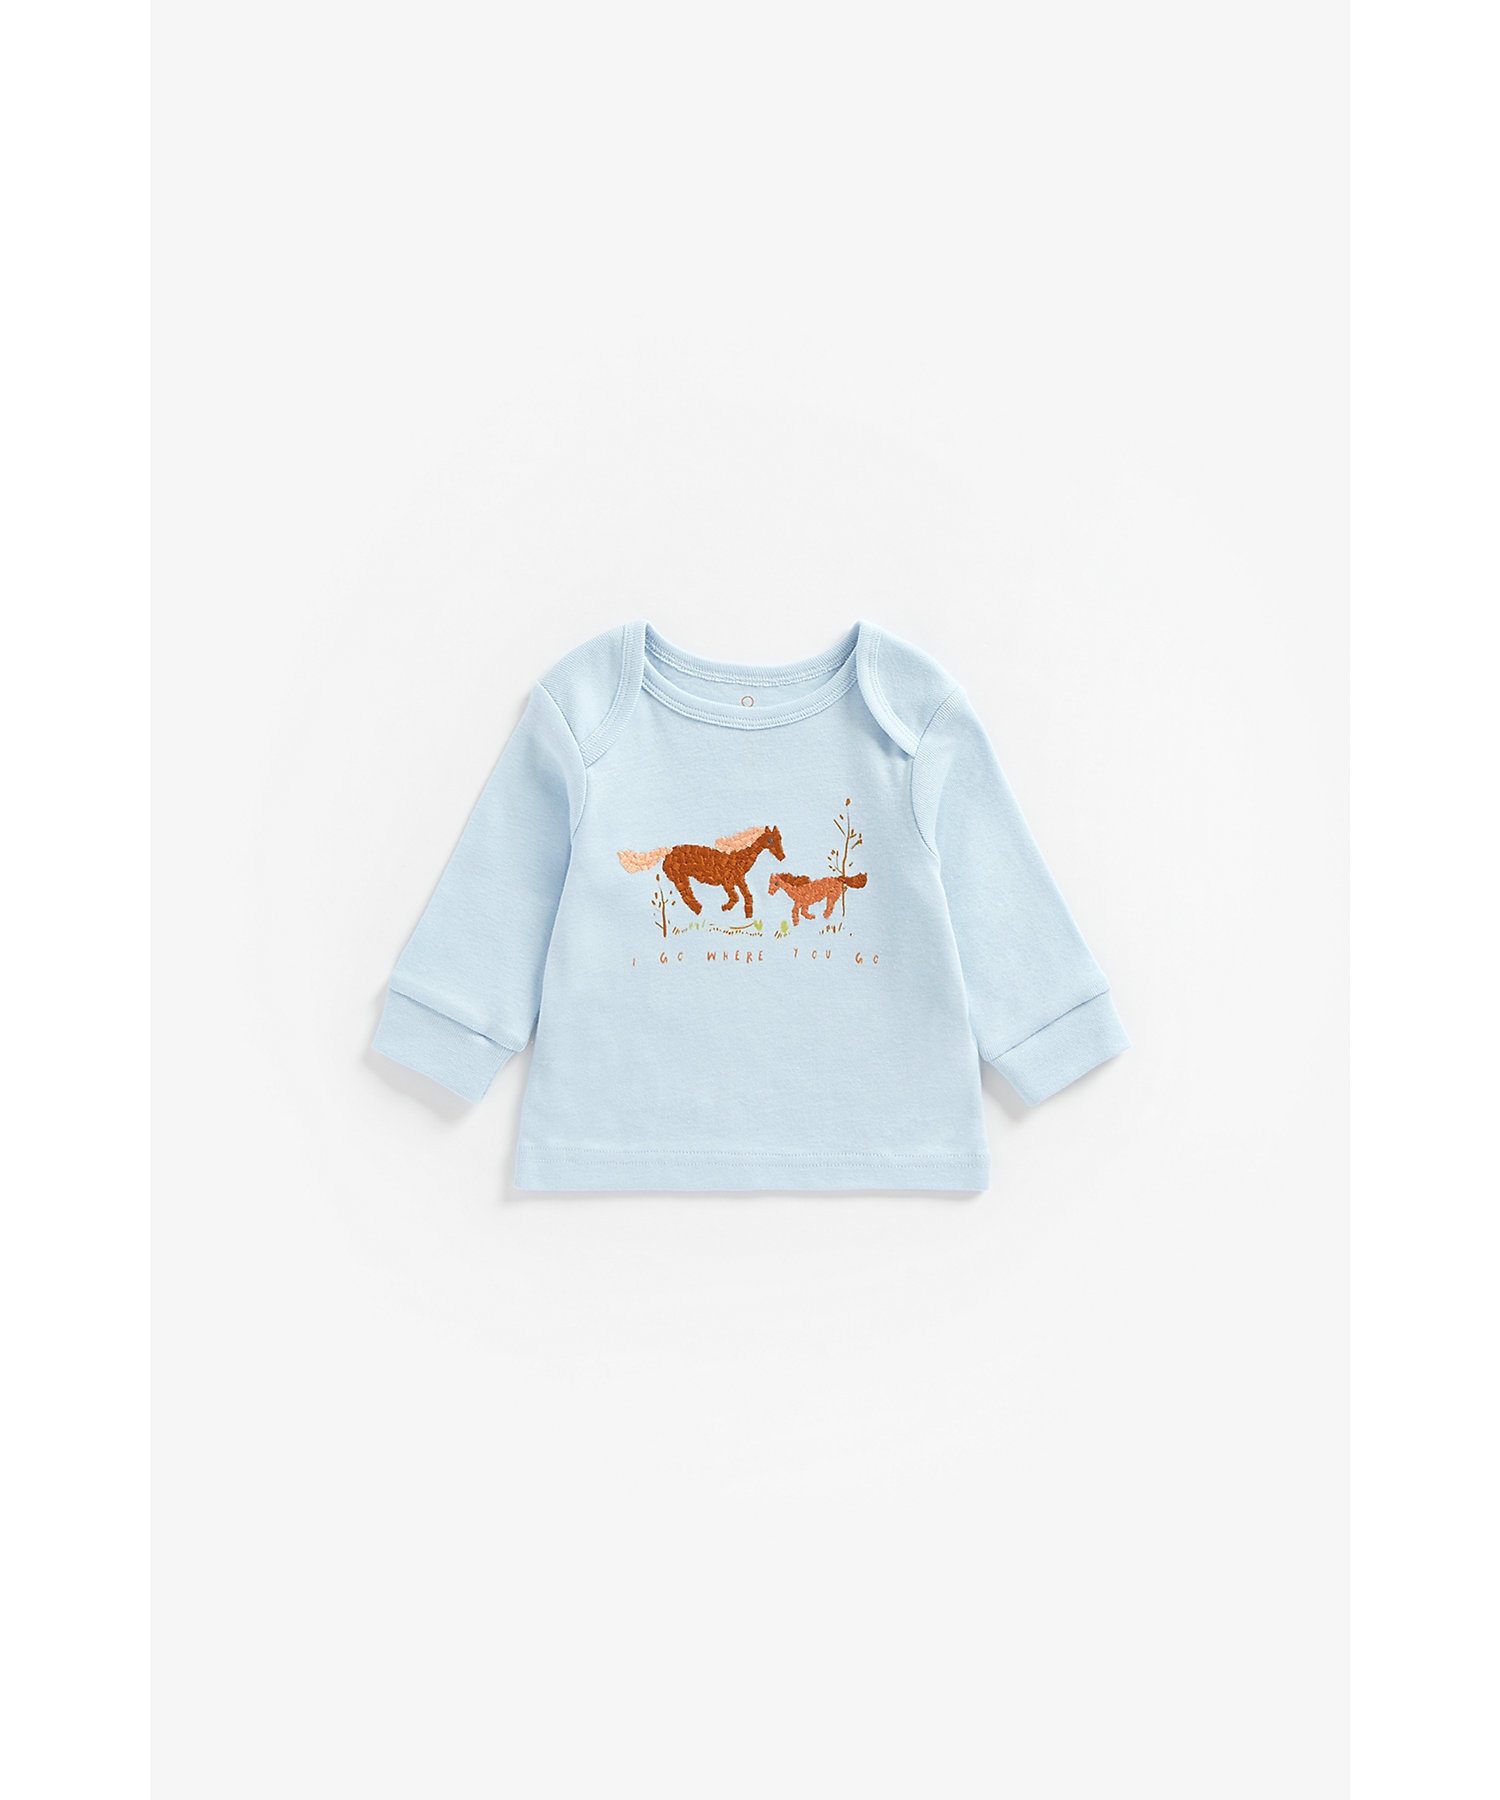 Mothercare | Boys Full Sleeves Pyjama Set Horse Embroidery - Pack Of 2 - Multicolor 2